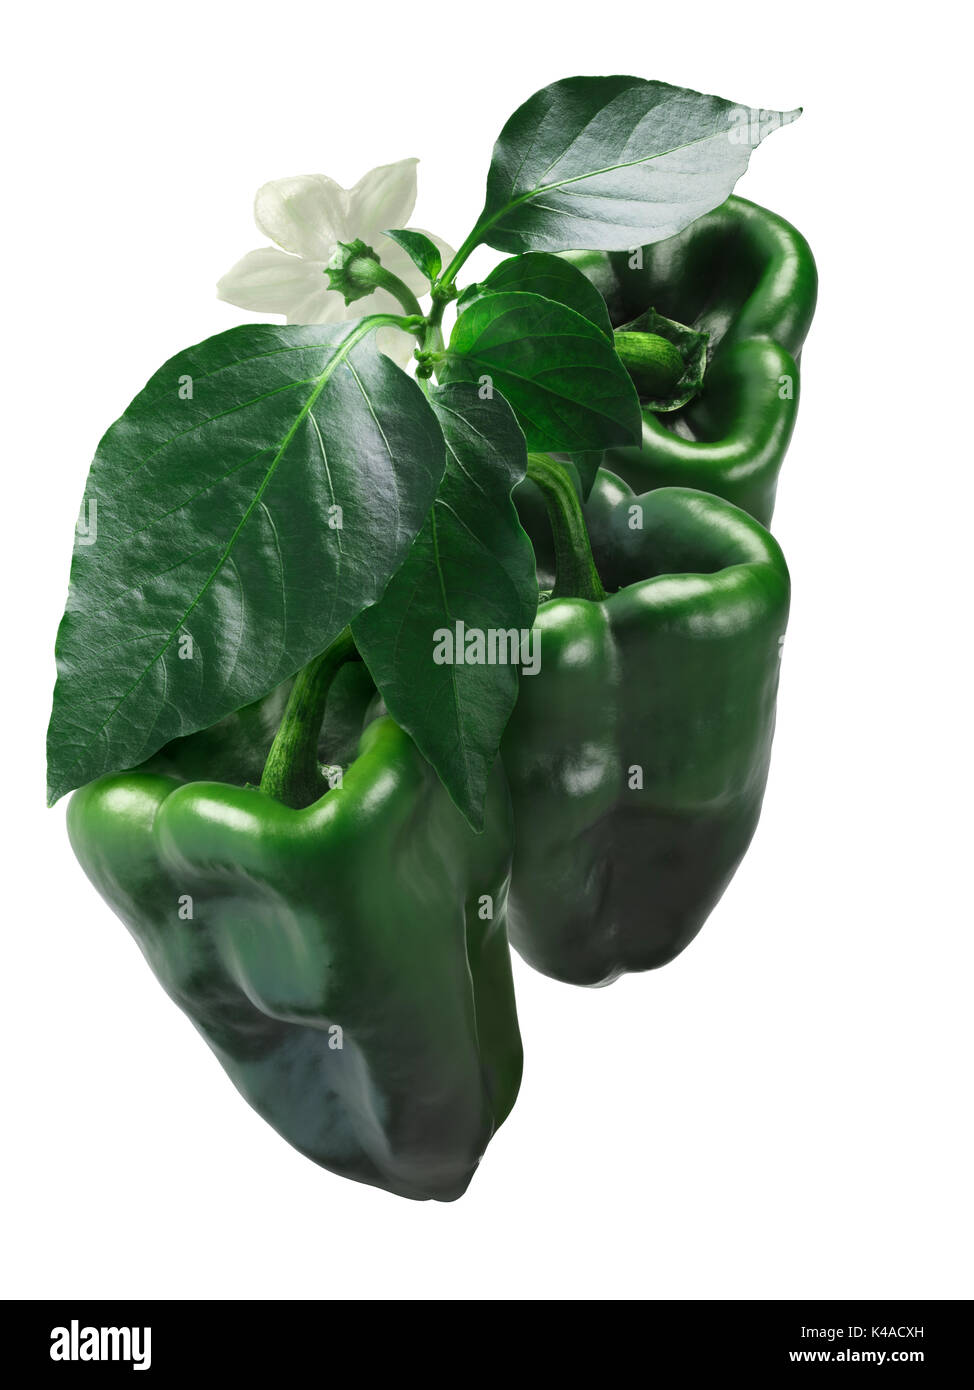 Ancho Grande chile pepper (Capsicum annuum), green, growing. Clipping paths Stock Photo